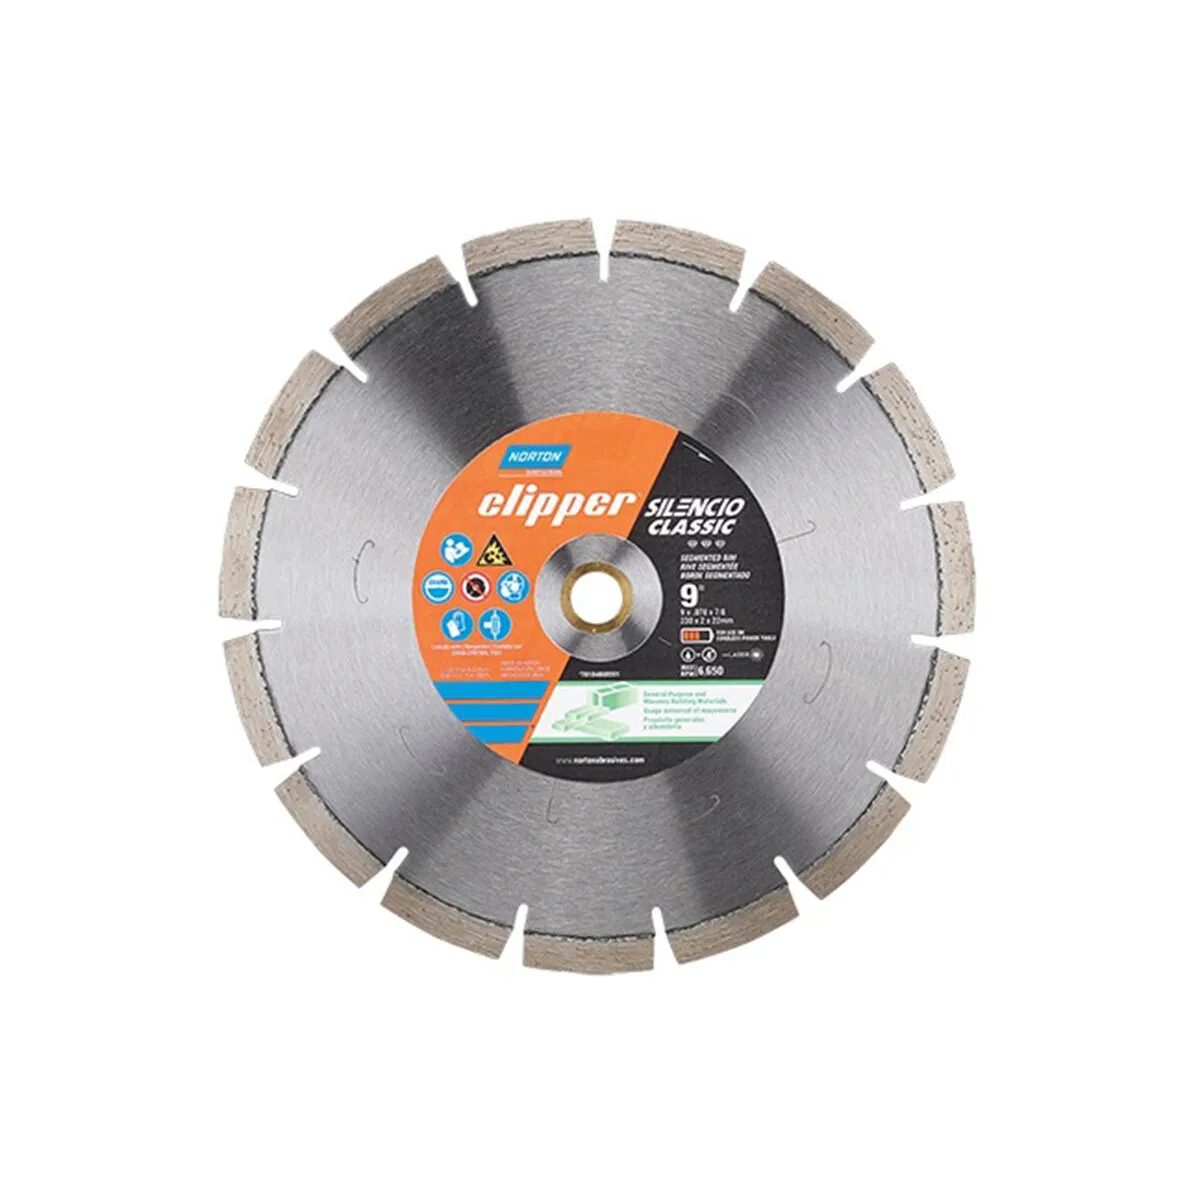 Norton 9-Inch Dry-Segmented Rim Hand-Held Saw Blade from Columbia Safety